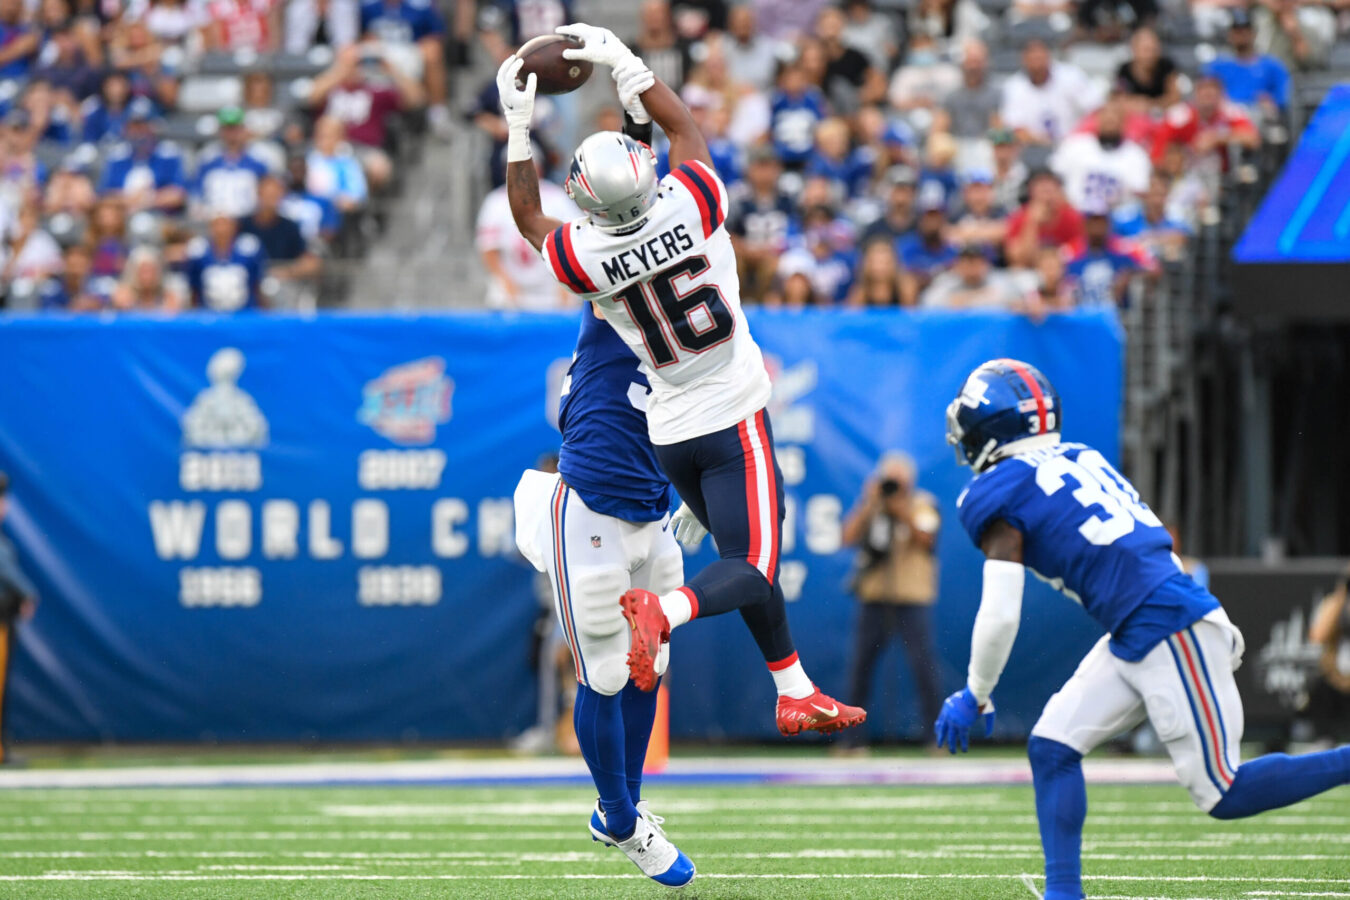 Aug 29, 2021; East Rutherford, New Jersey, USA; New England Patriots wide receiver Jakobi Meyers (16) makes a catch against the New York Giants at MetLife Stadium. Mandatory Credit: Dennis Schneidler-USA TODAY Sports